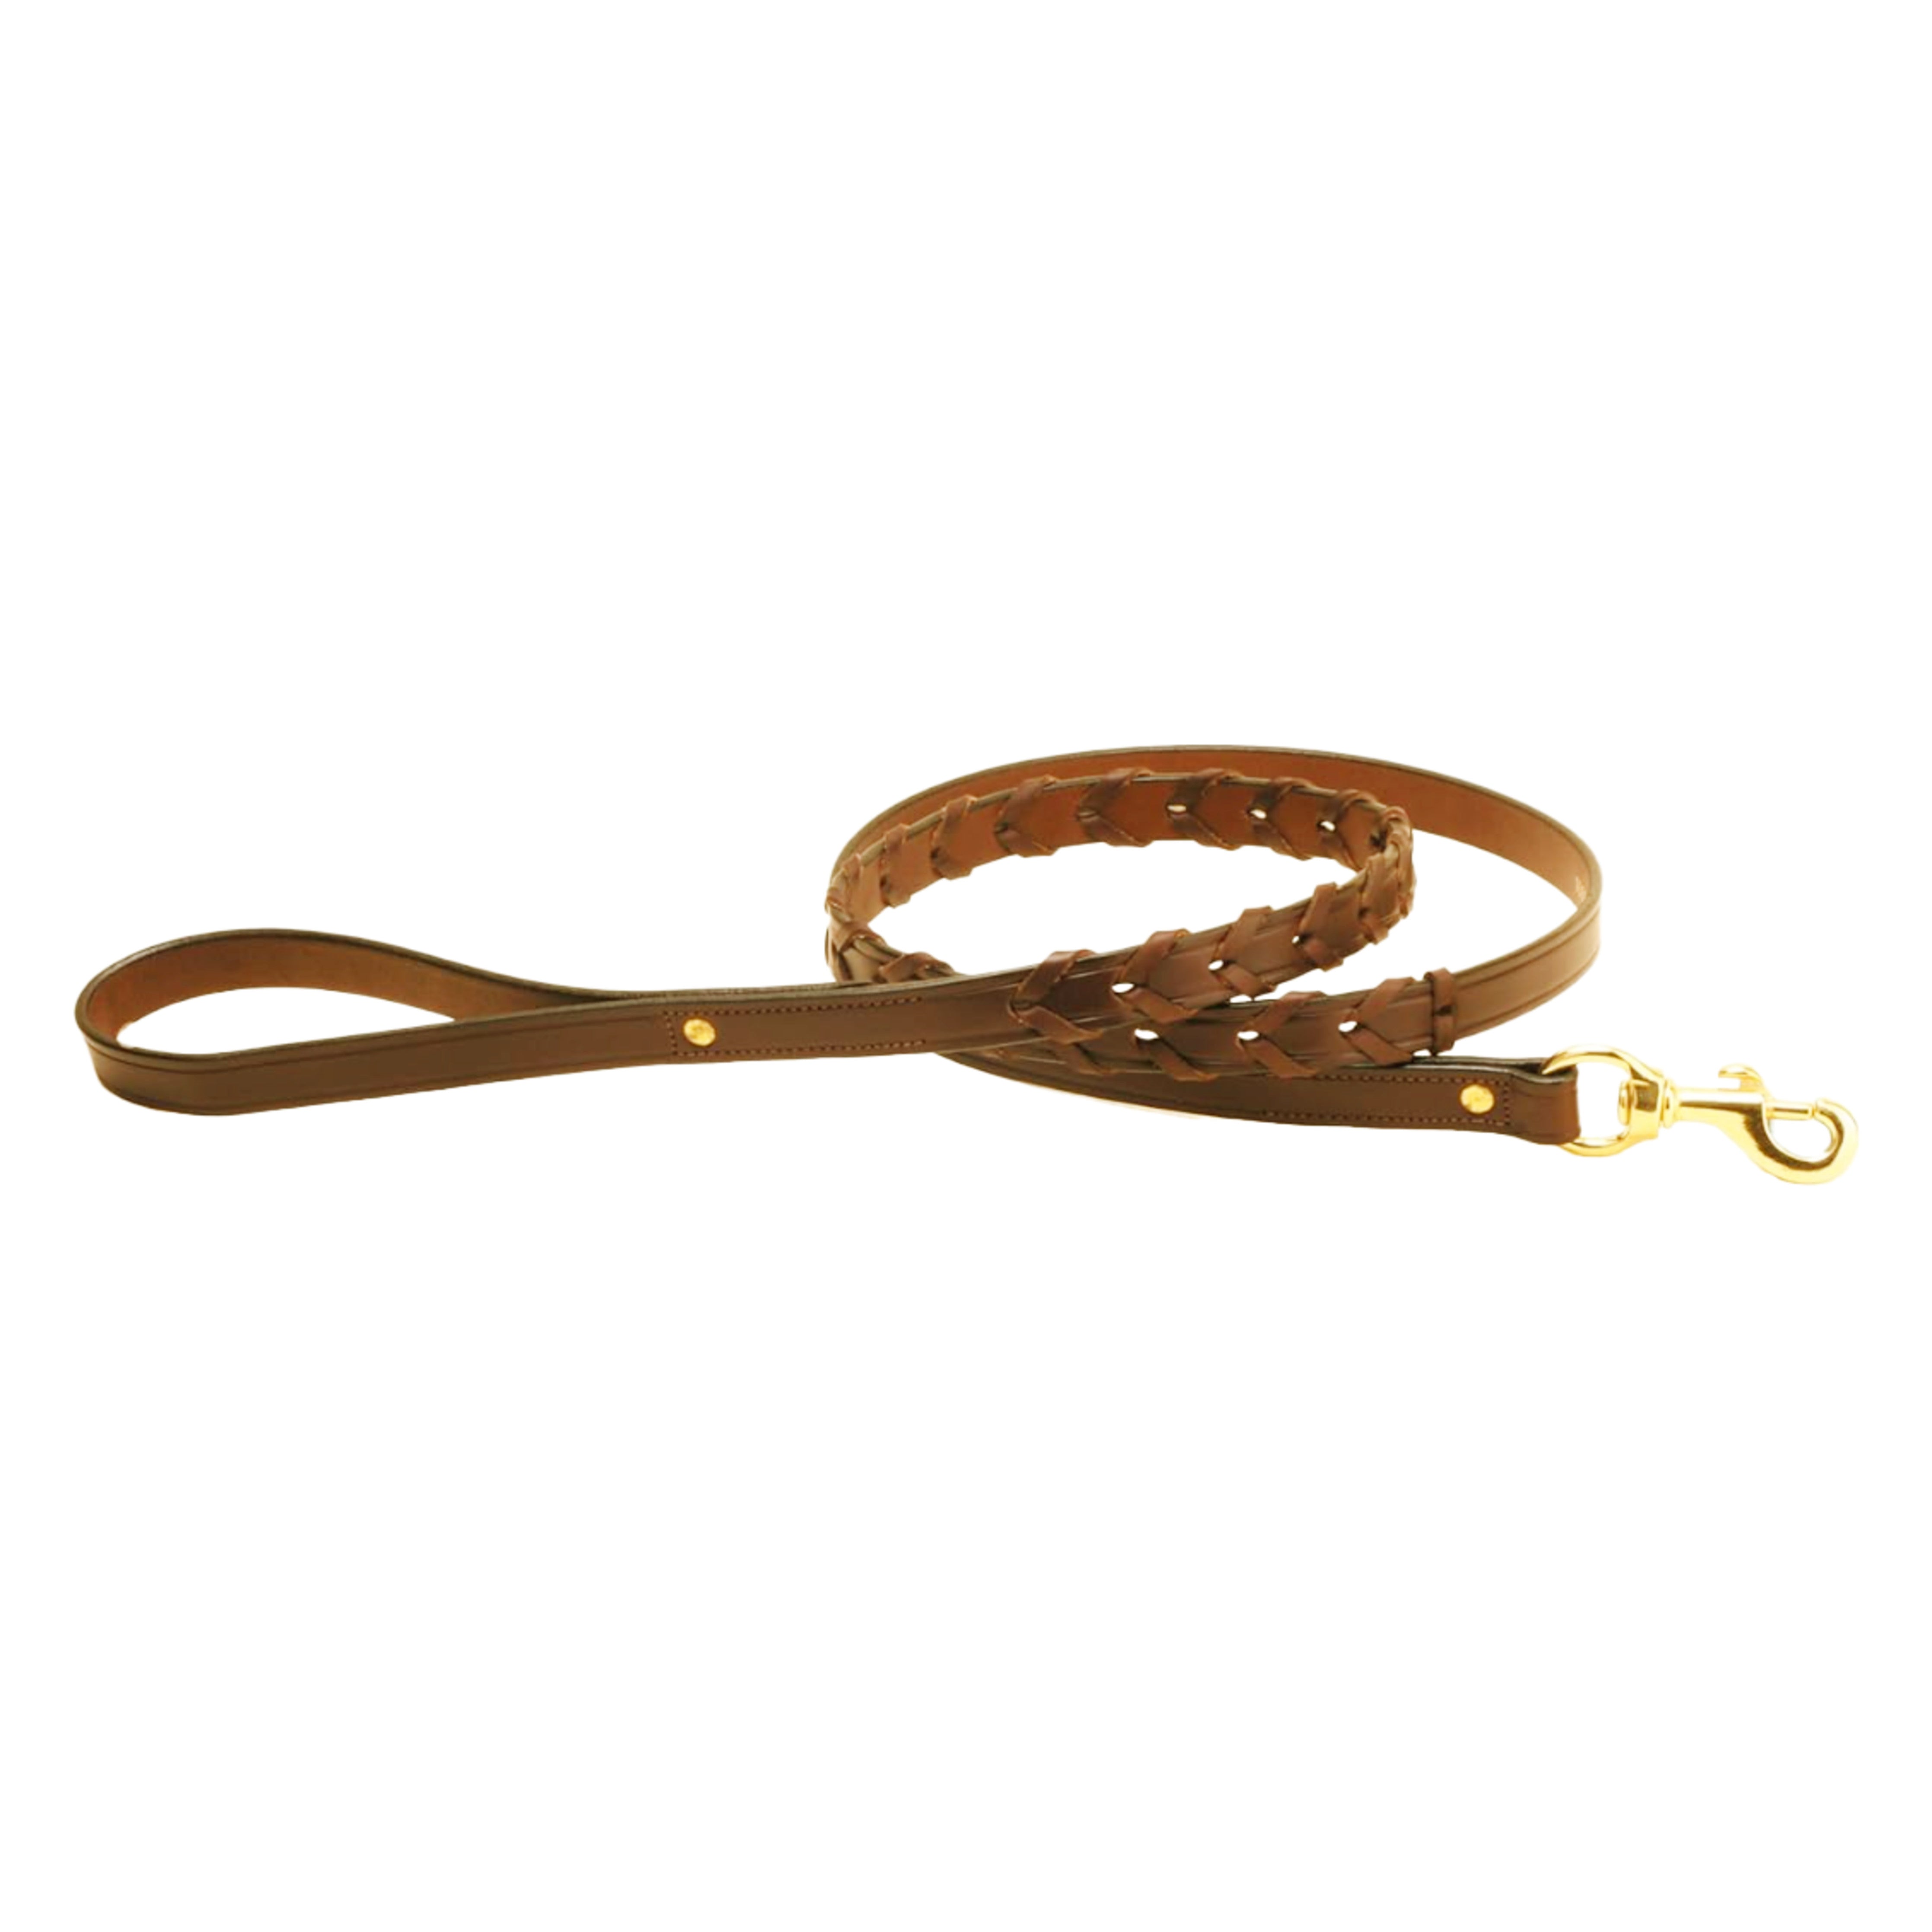 Tory Leather Dog Leash Laced Rein